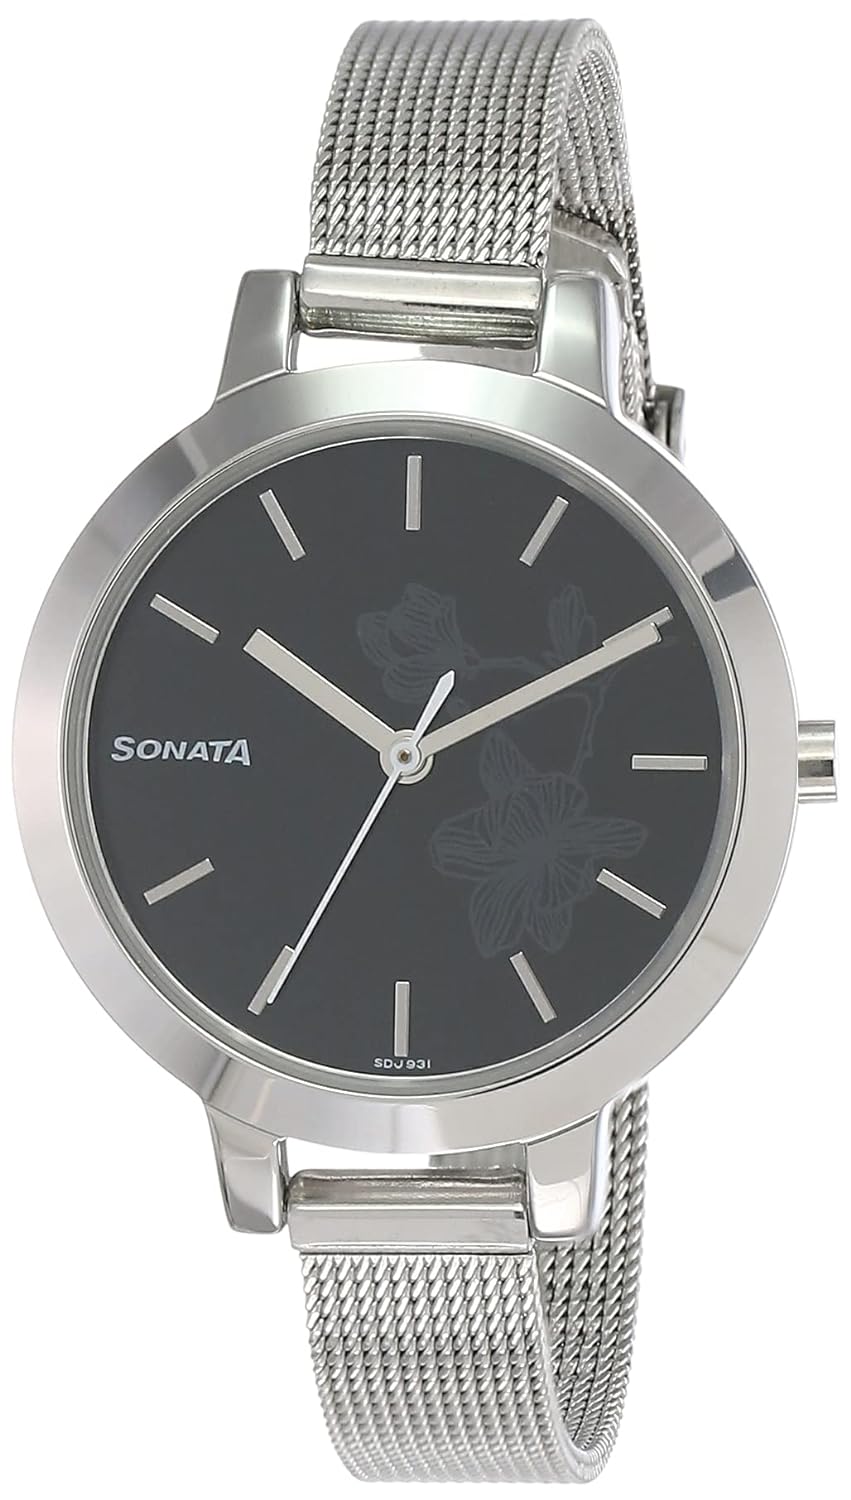 Sonata Silver Lining Women's Watch Black Dial With Stainless Steel Strap  8141SM09